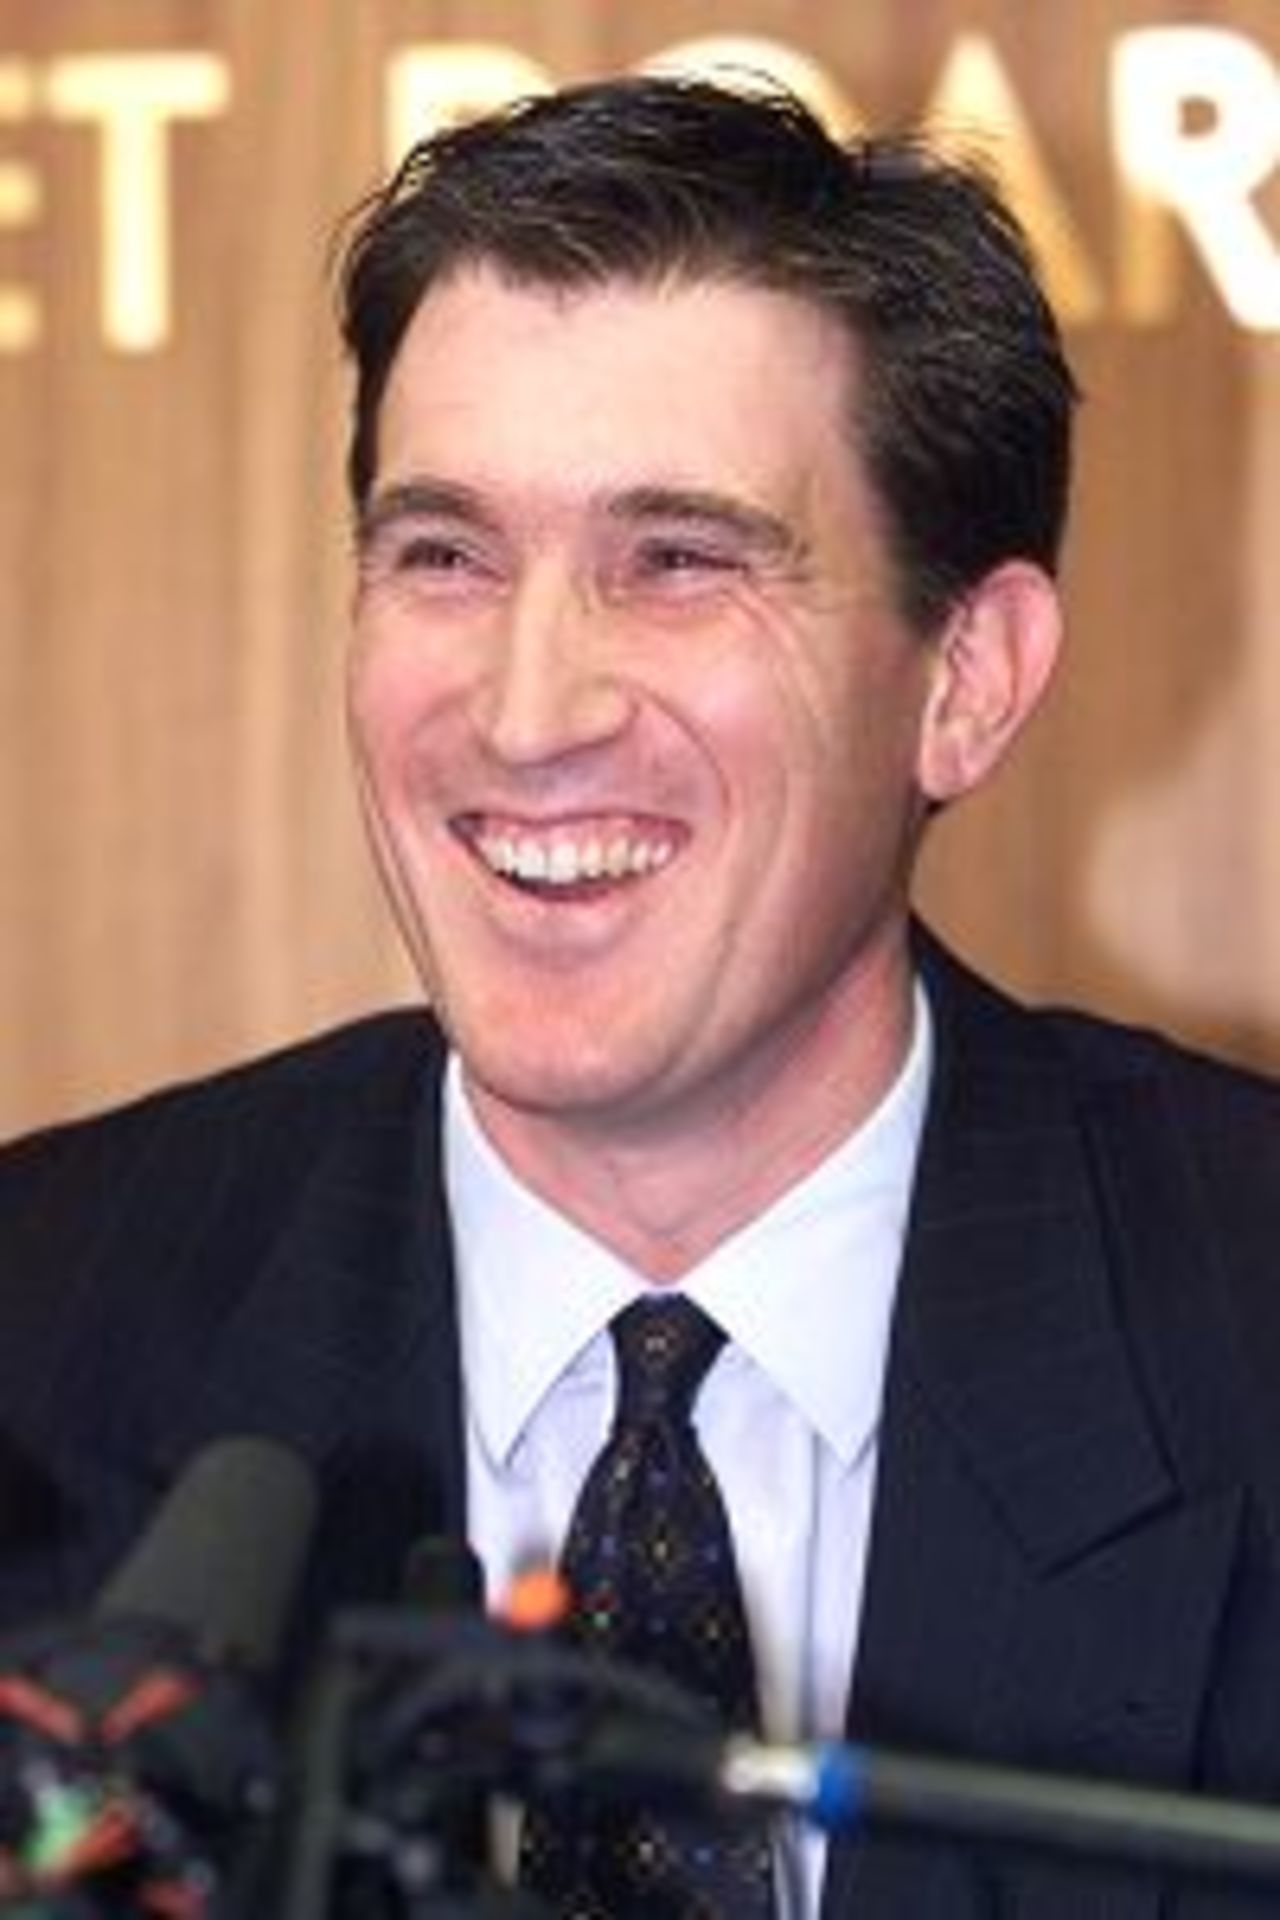 James Sutherland answers questions from the media, after being named to replace Malcolm Speed as the CEO of the Australian Cricket Board, during a press conference at ACB House, Melbourne, Australia.